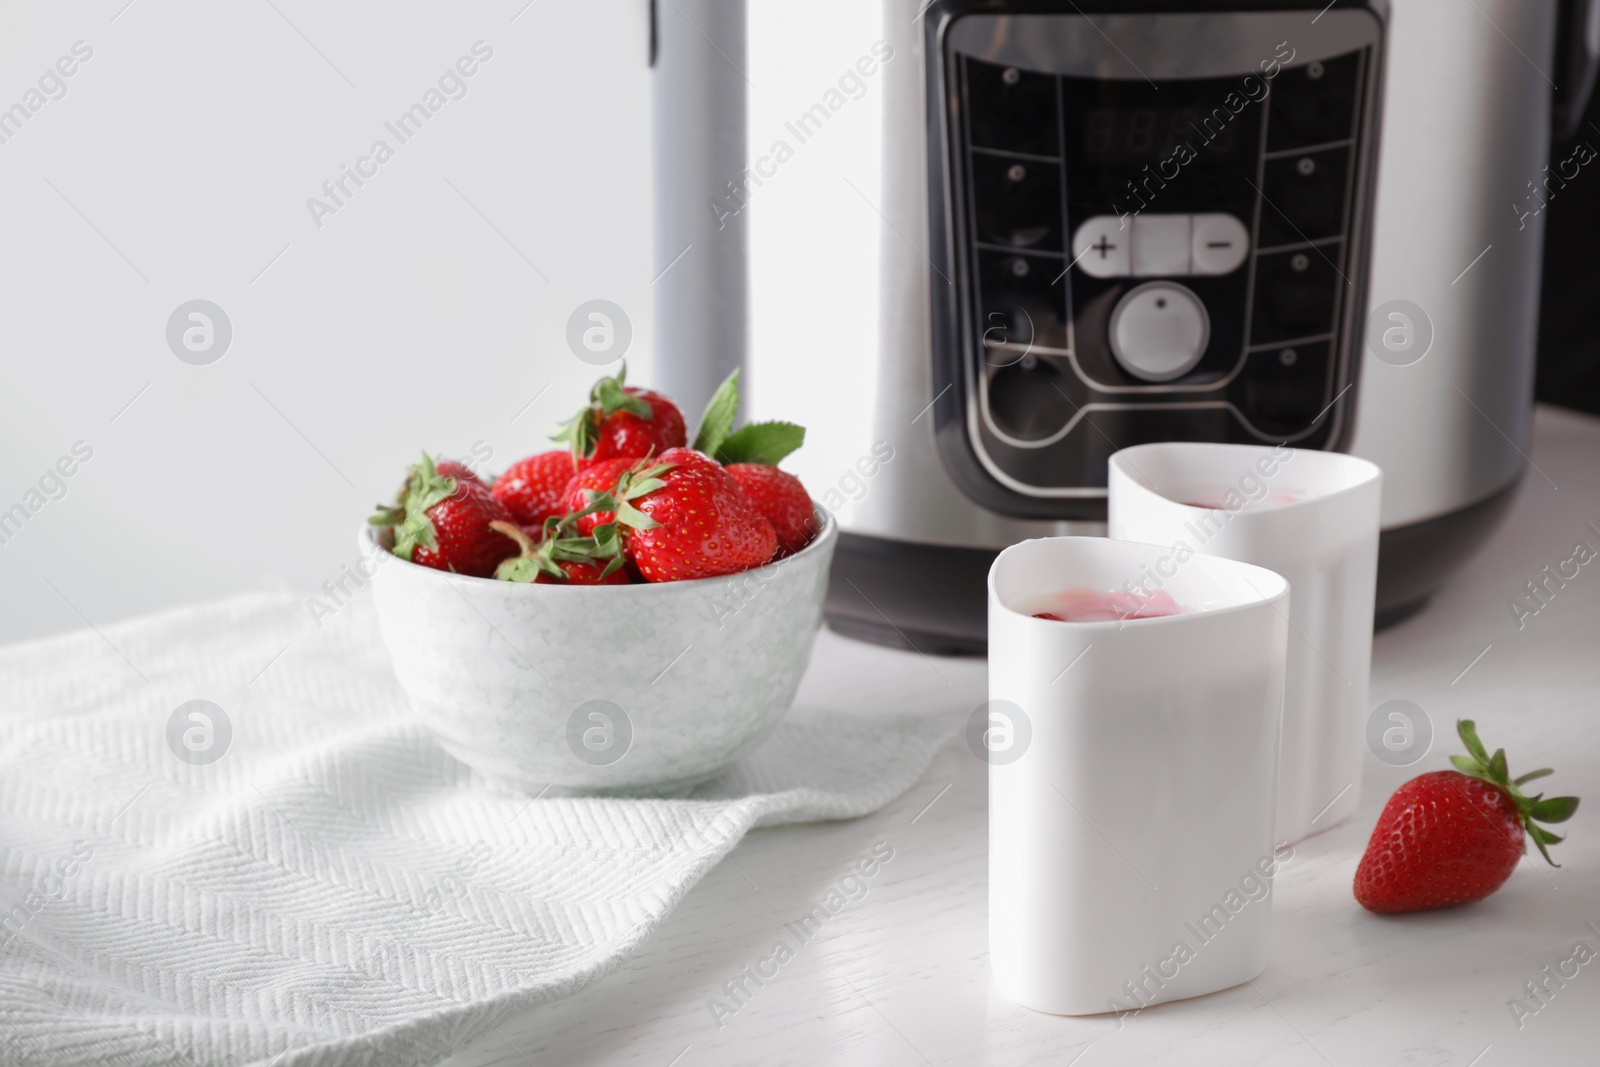 Photo of Cups of homemade yogurt, strawberries and multi cooker on table